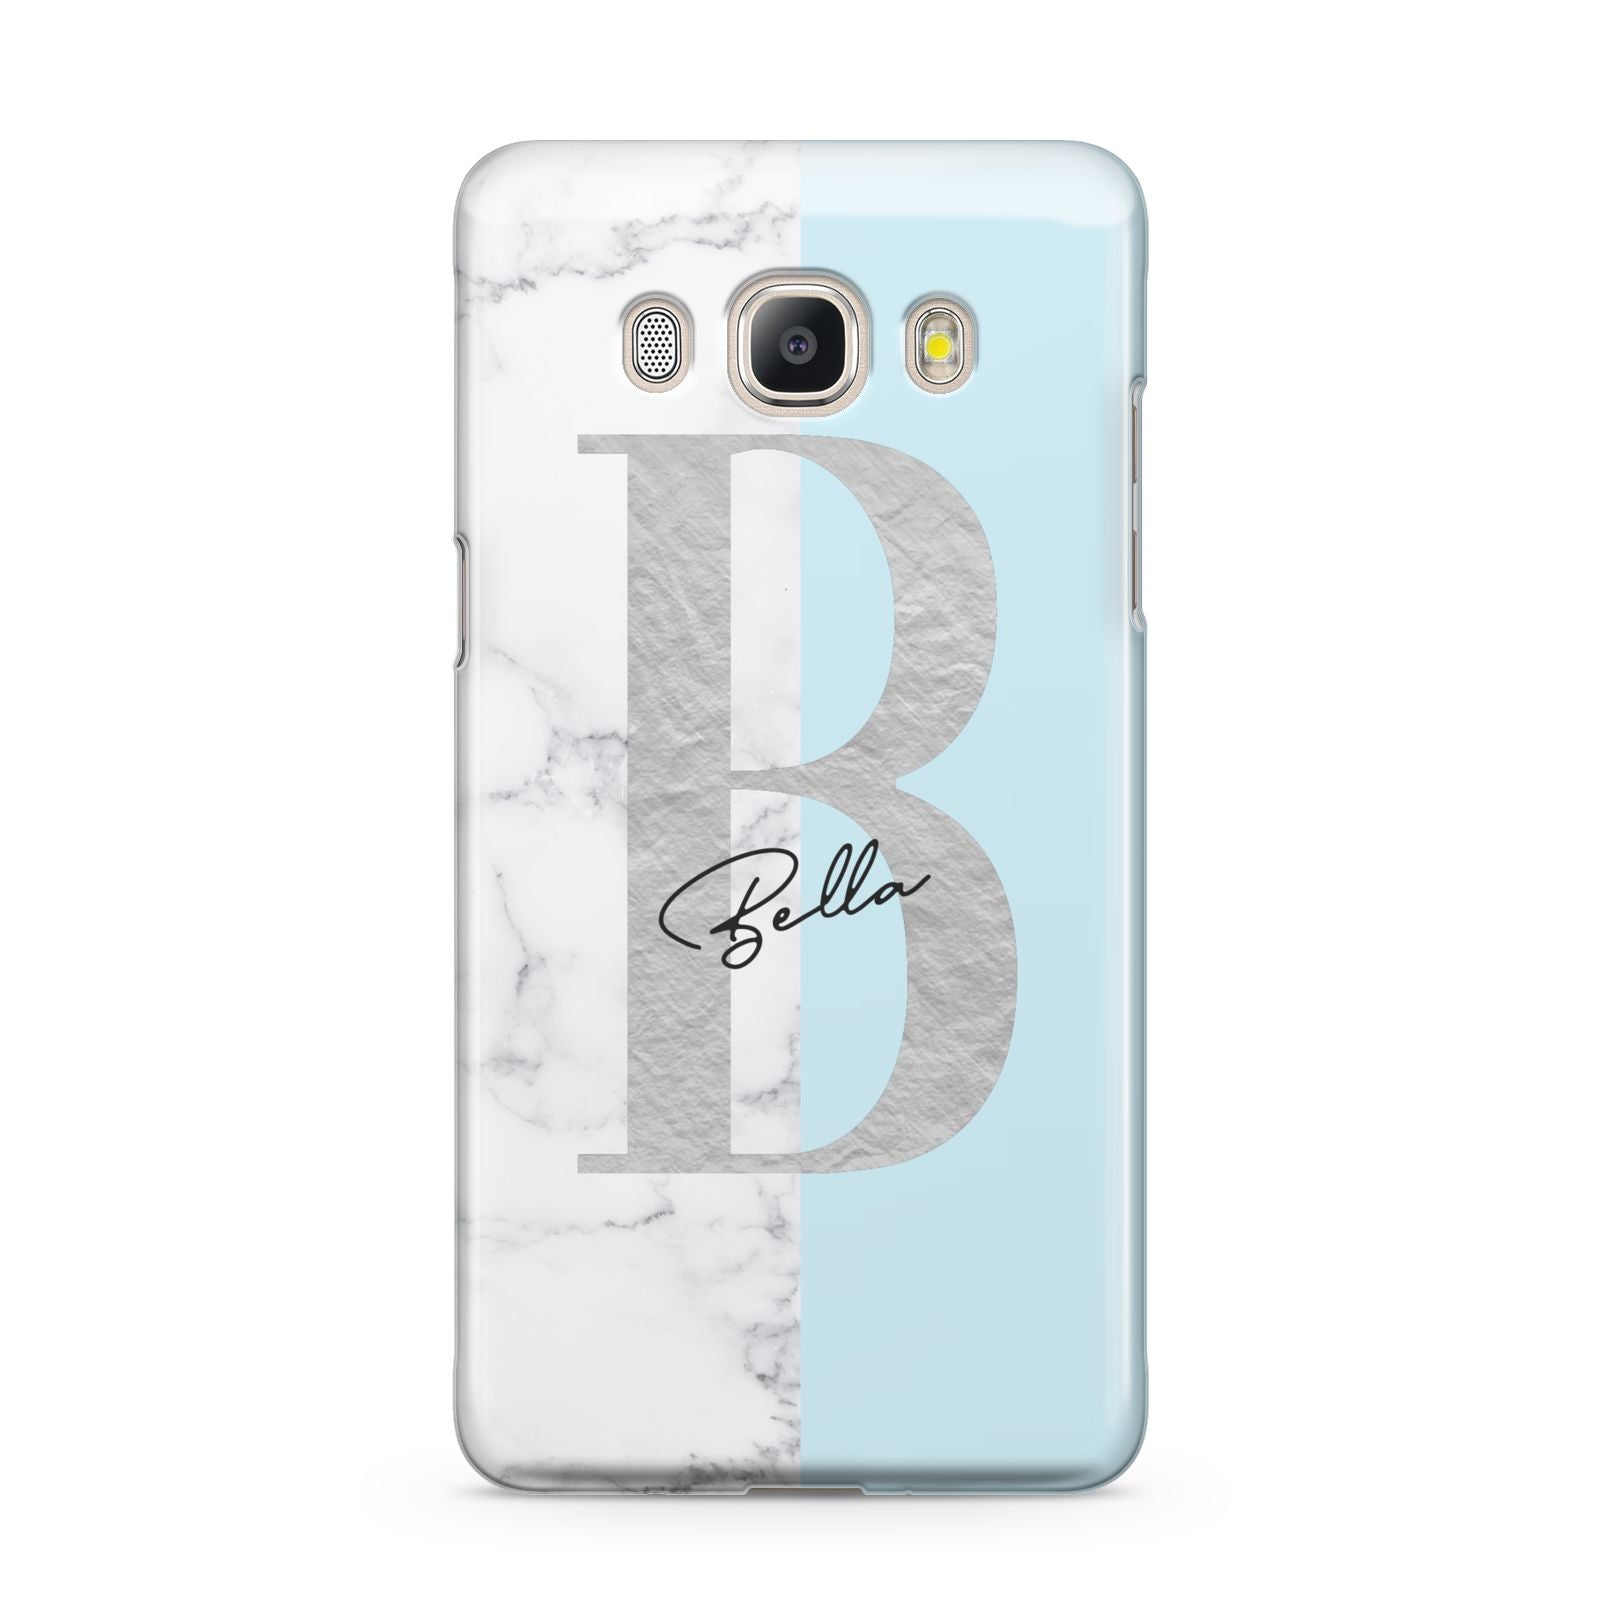 Personalised Chrome Marble Samsung Galaxy J5 2016 Case